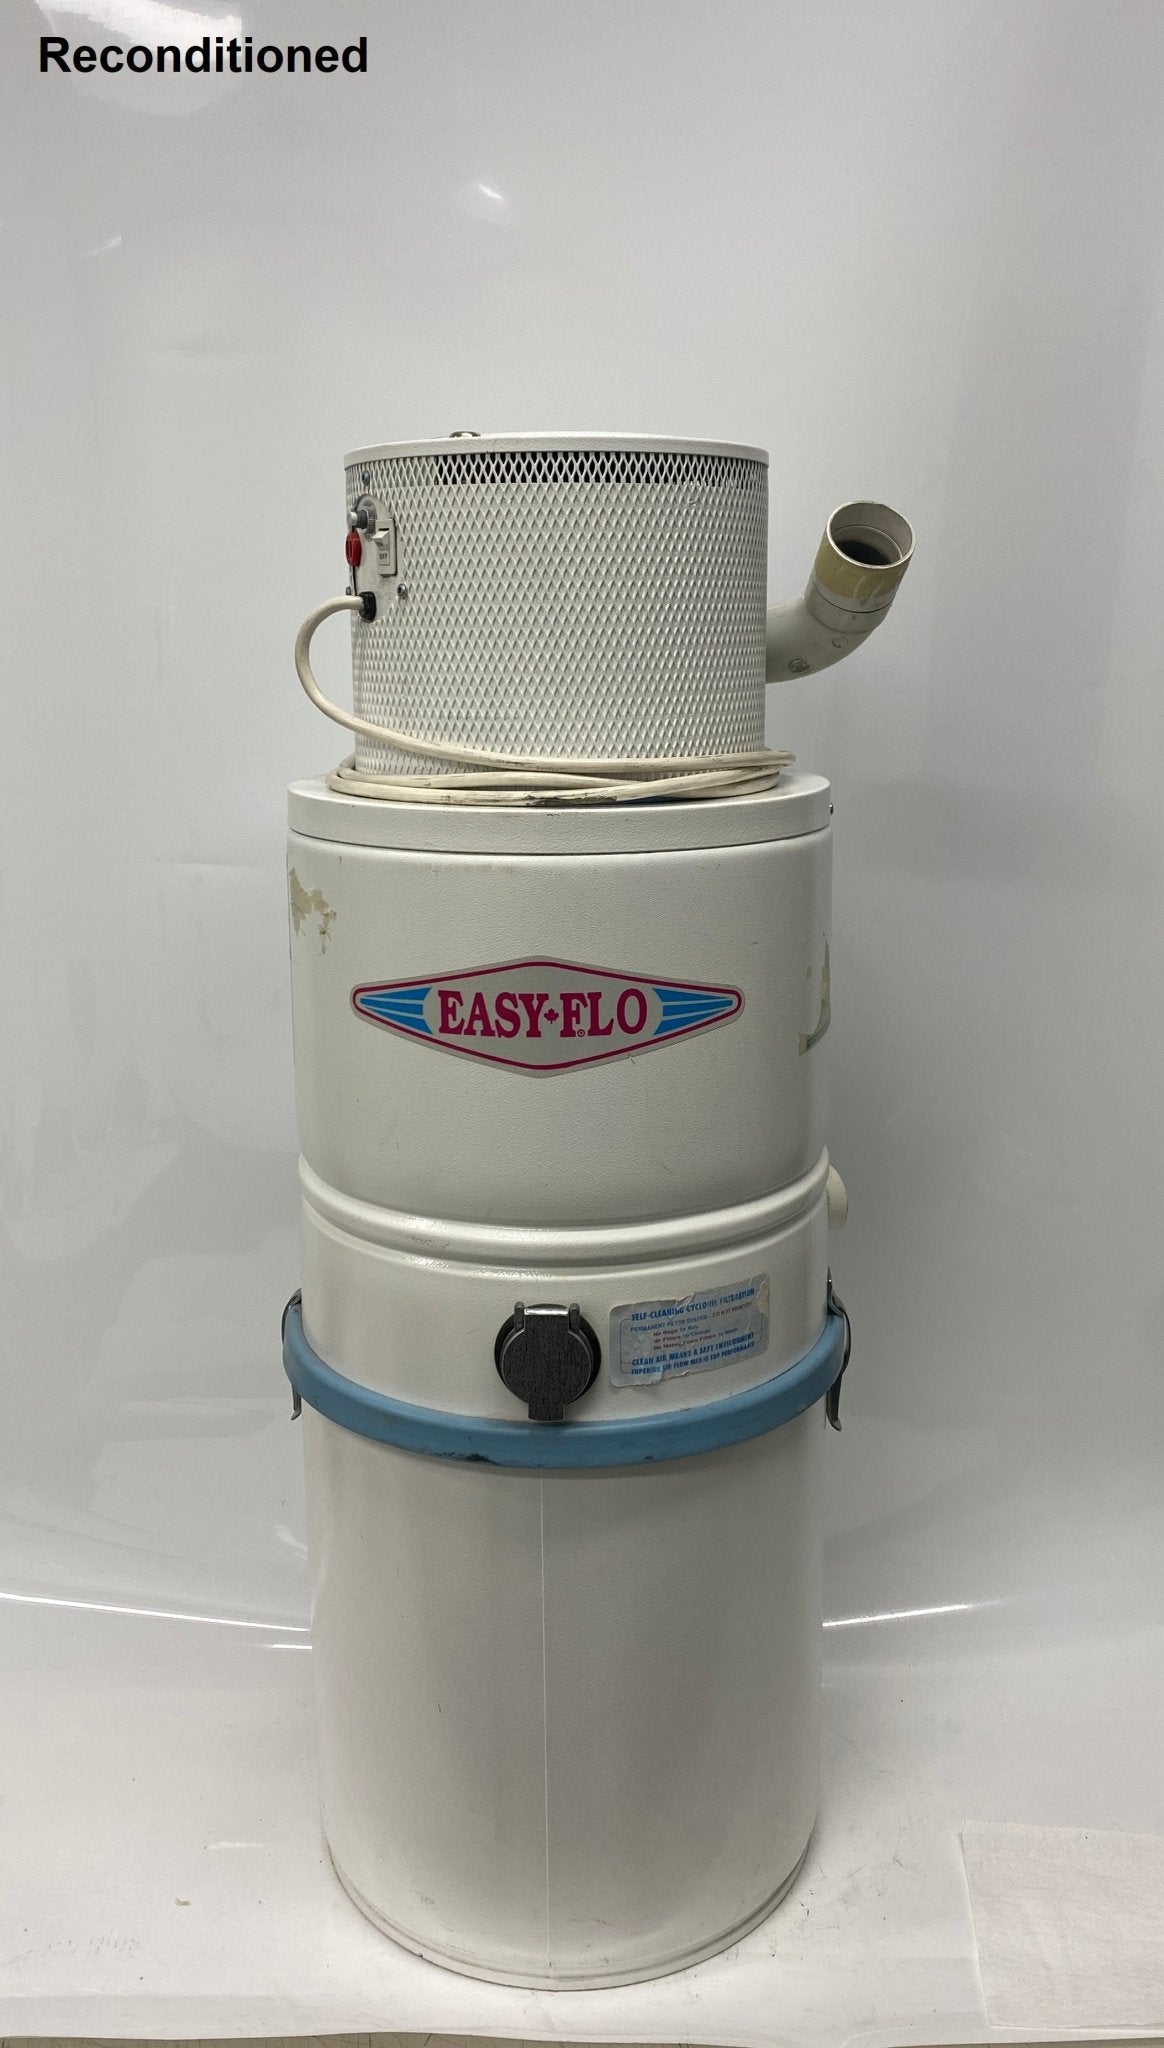 Top-Notch Allergy-Friendly Central Vacuum System